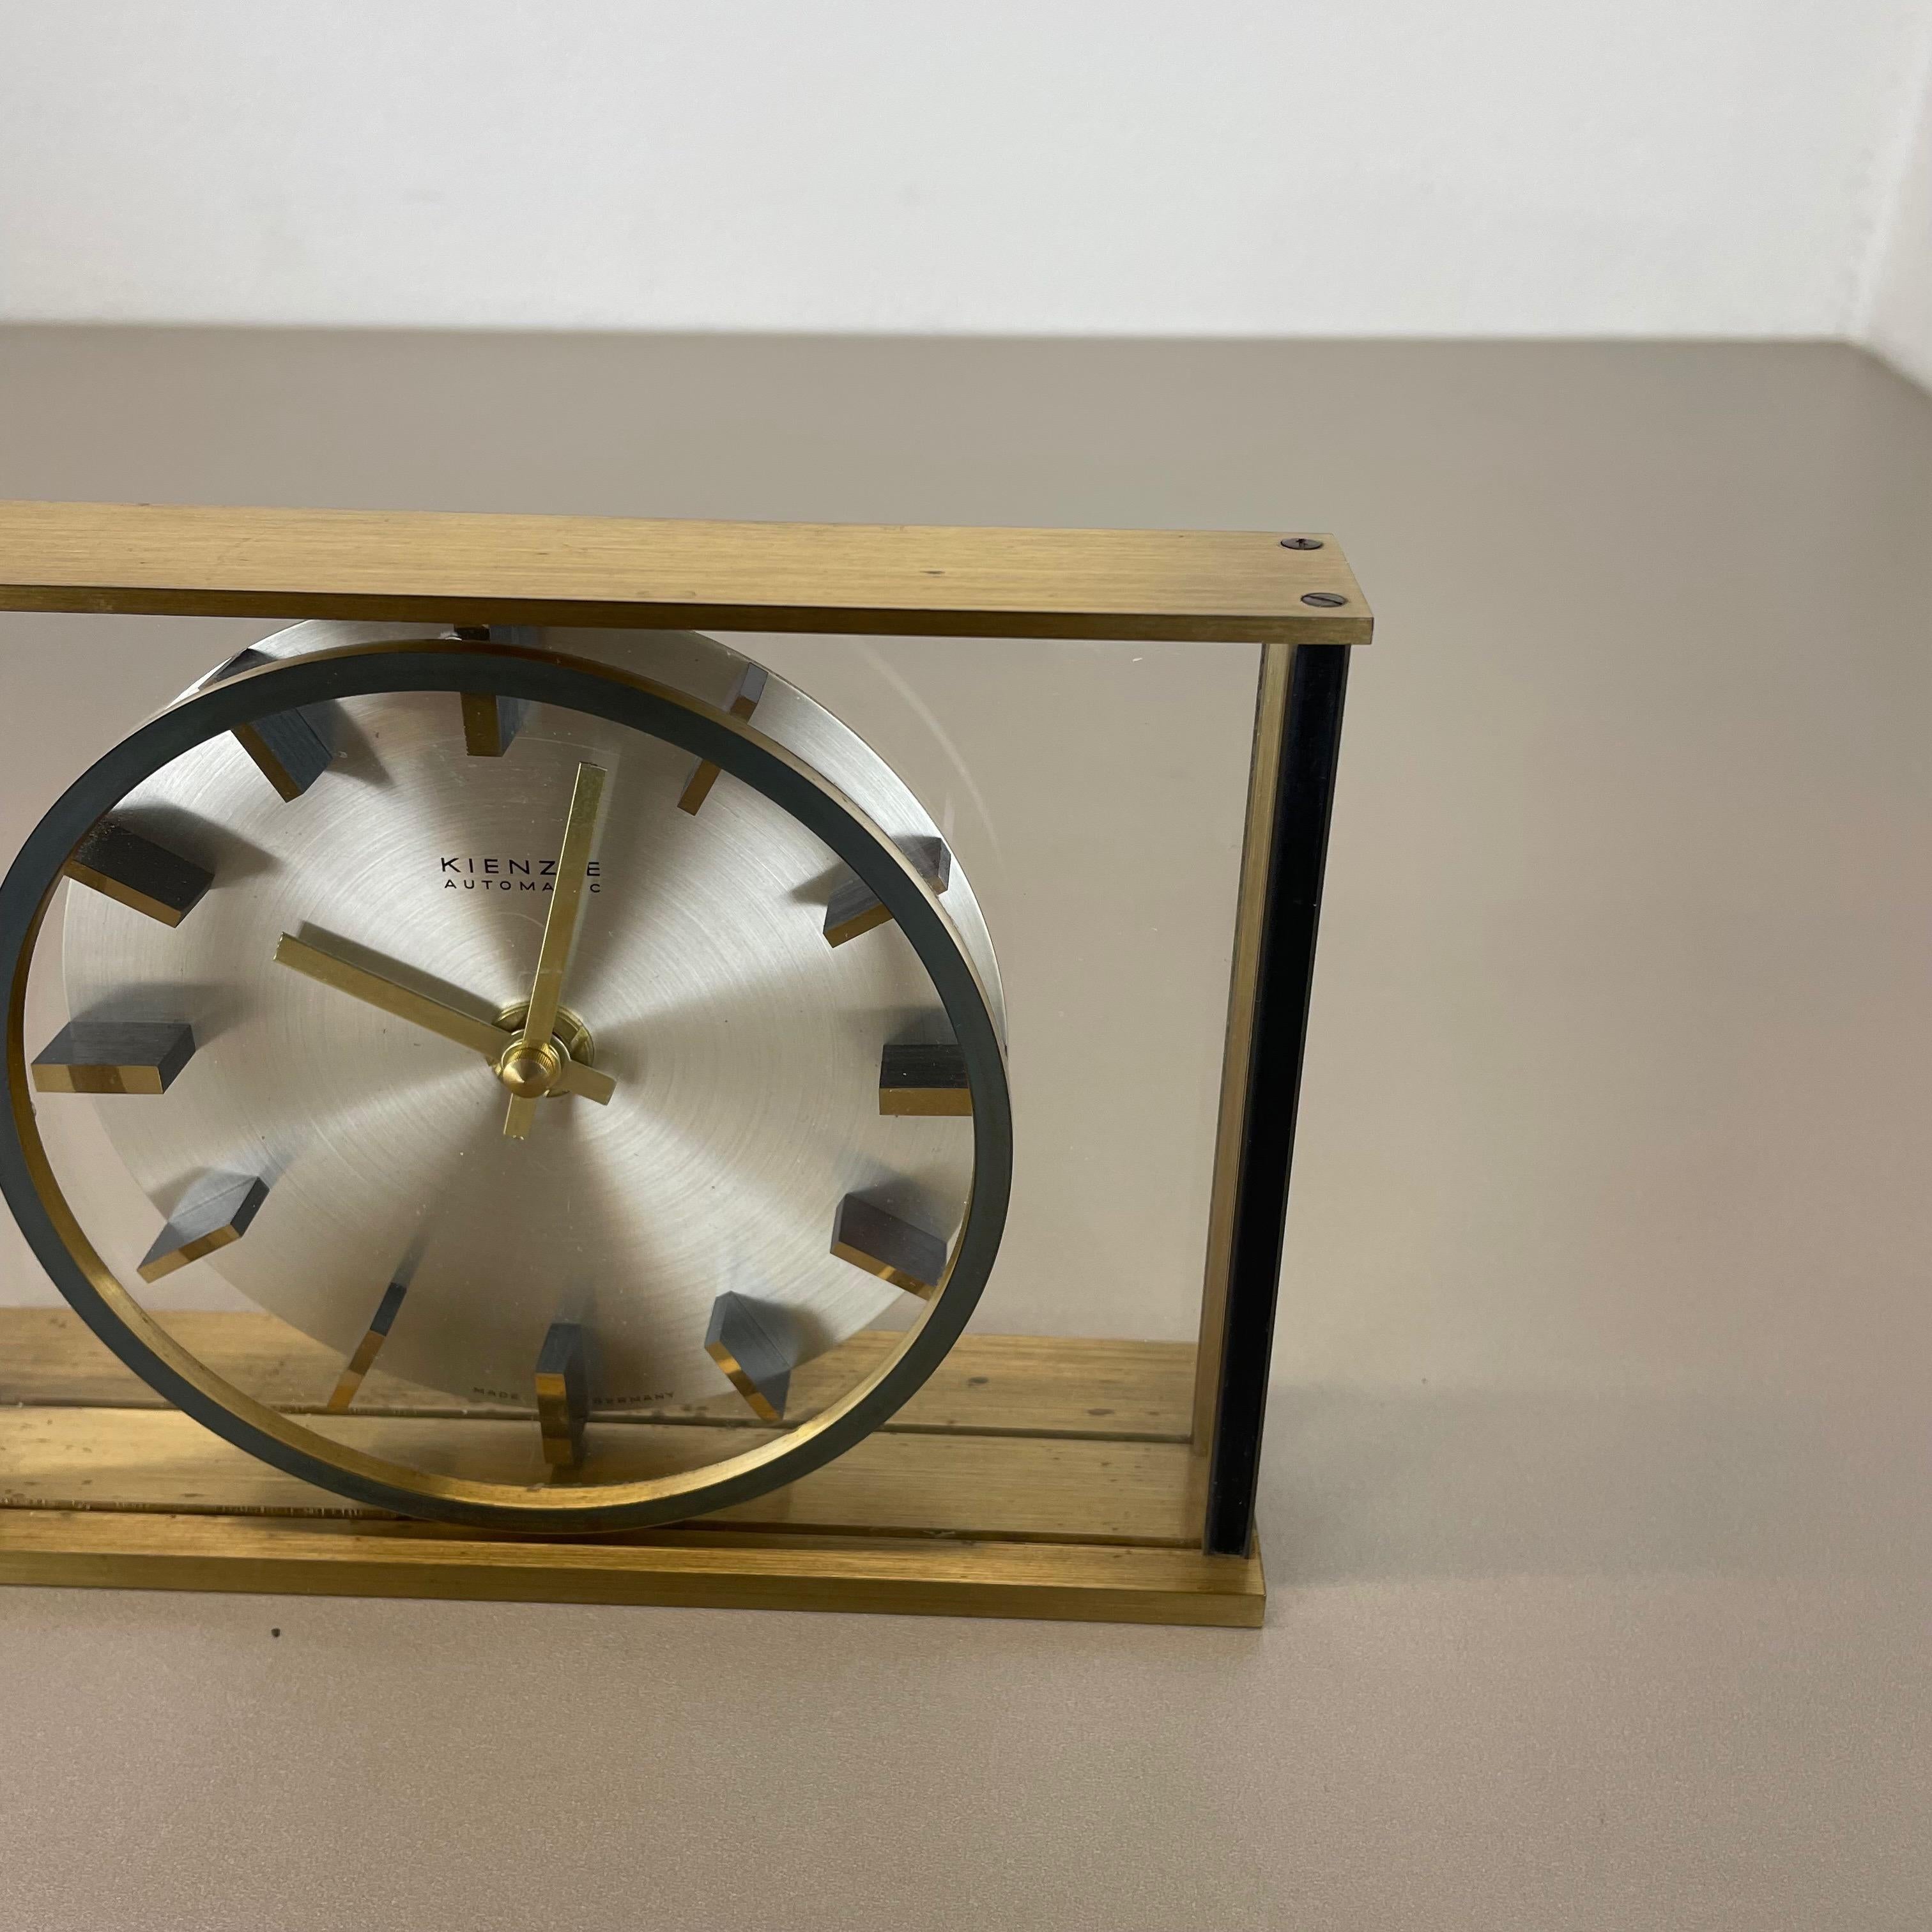 Vintage Hollywood Regency Brass Glass Table Clock by Kienzle, Germany 1970s In Good Condition For Sale In Kirchlengern, DE